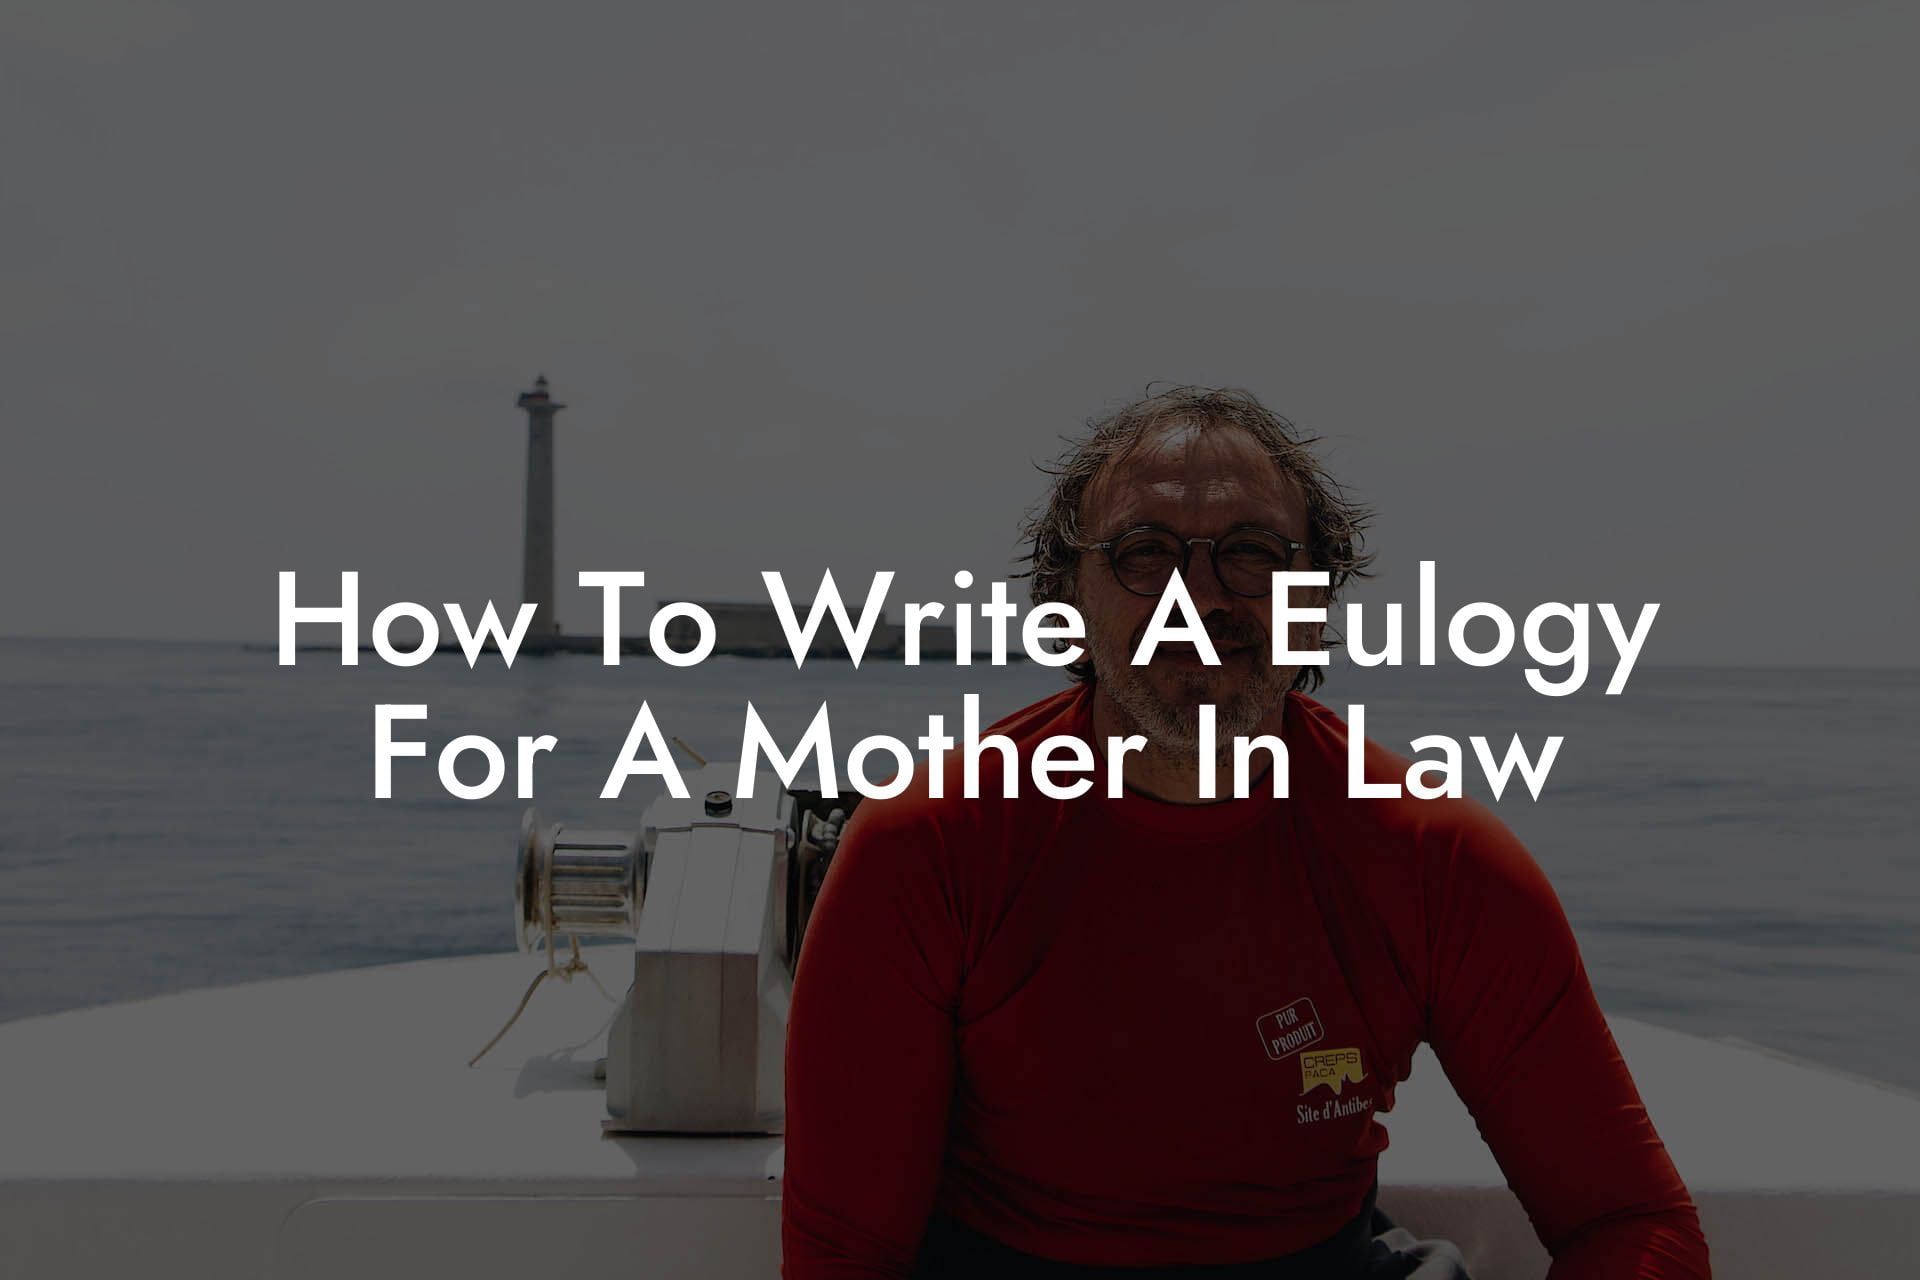 How To Write A Eulogy For A Mother In Law